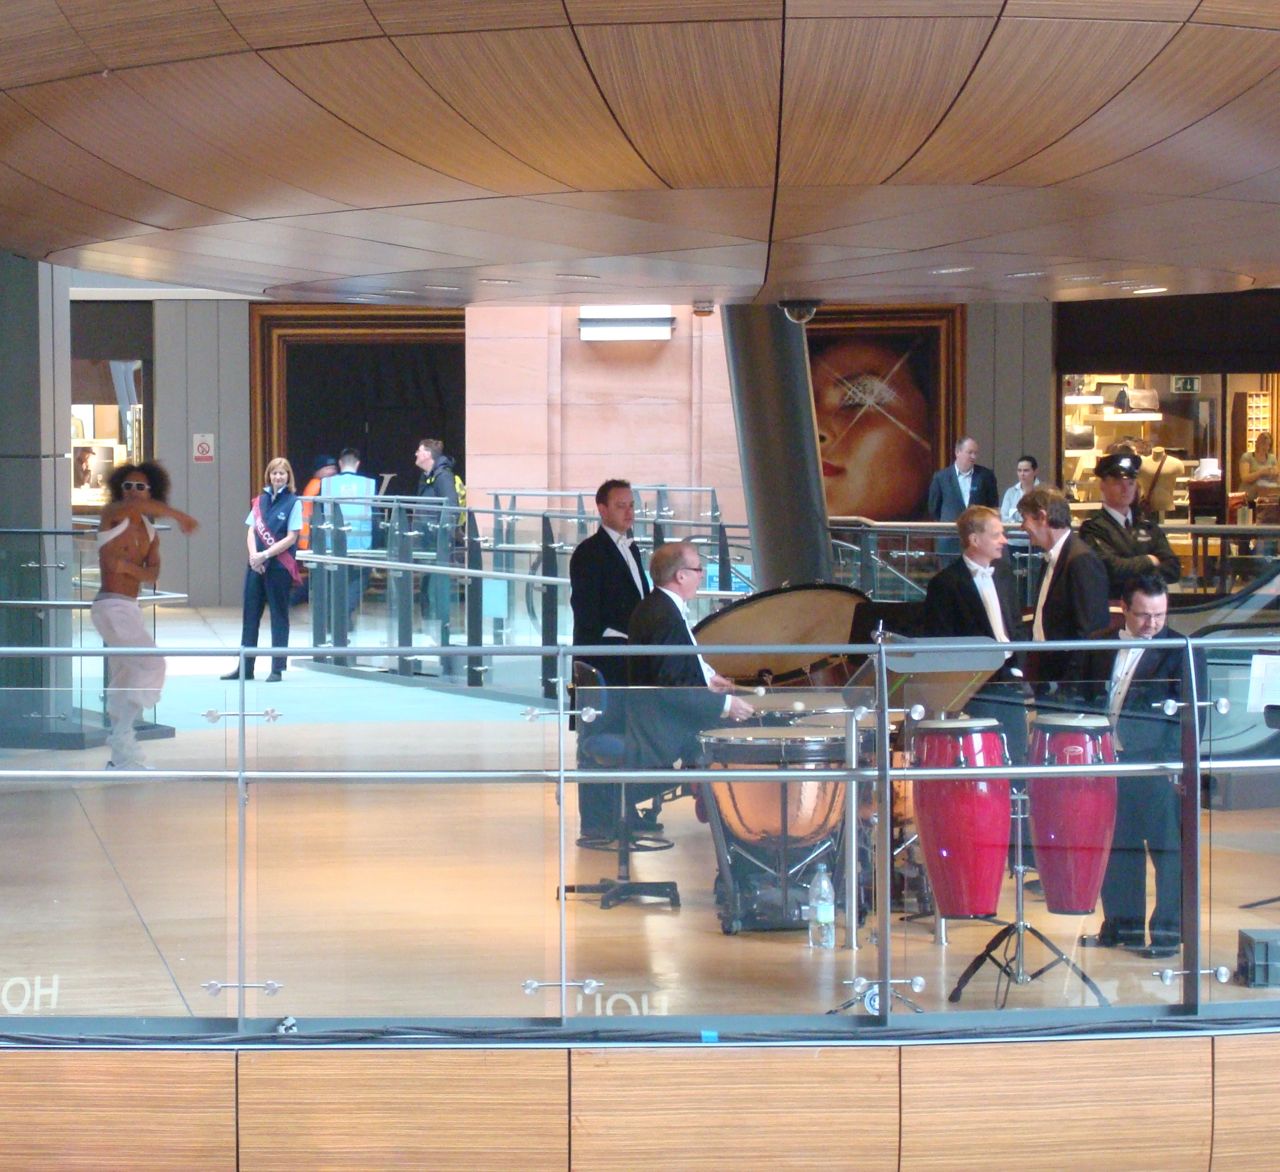 Ulster Orchestra kick off the opening of Victoria Square